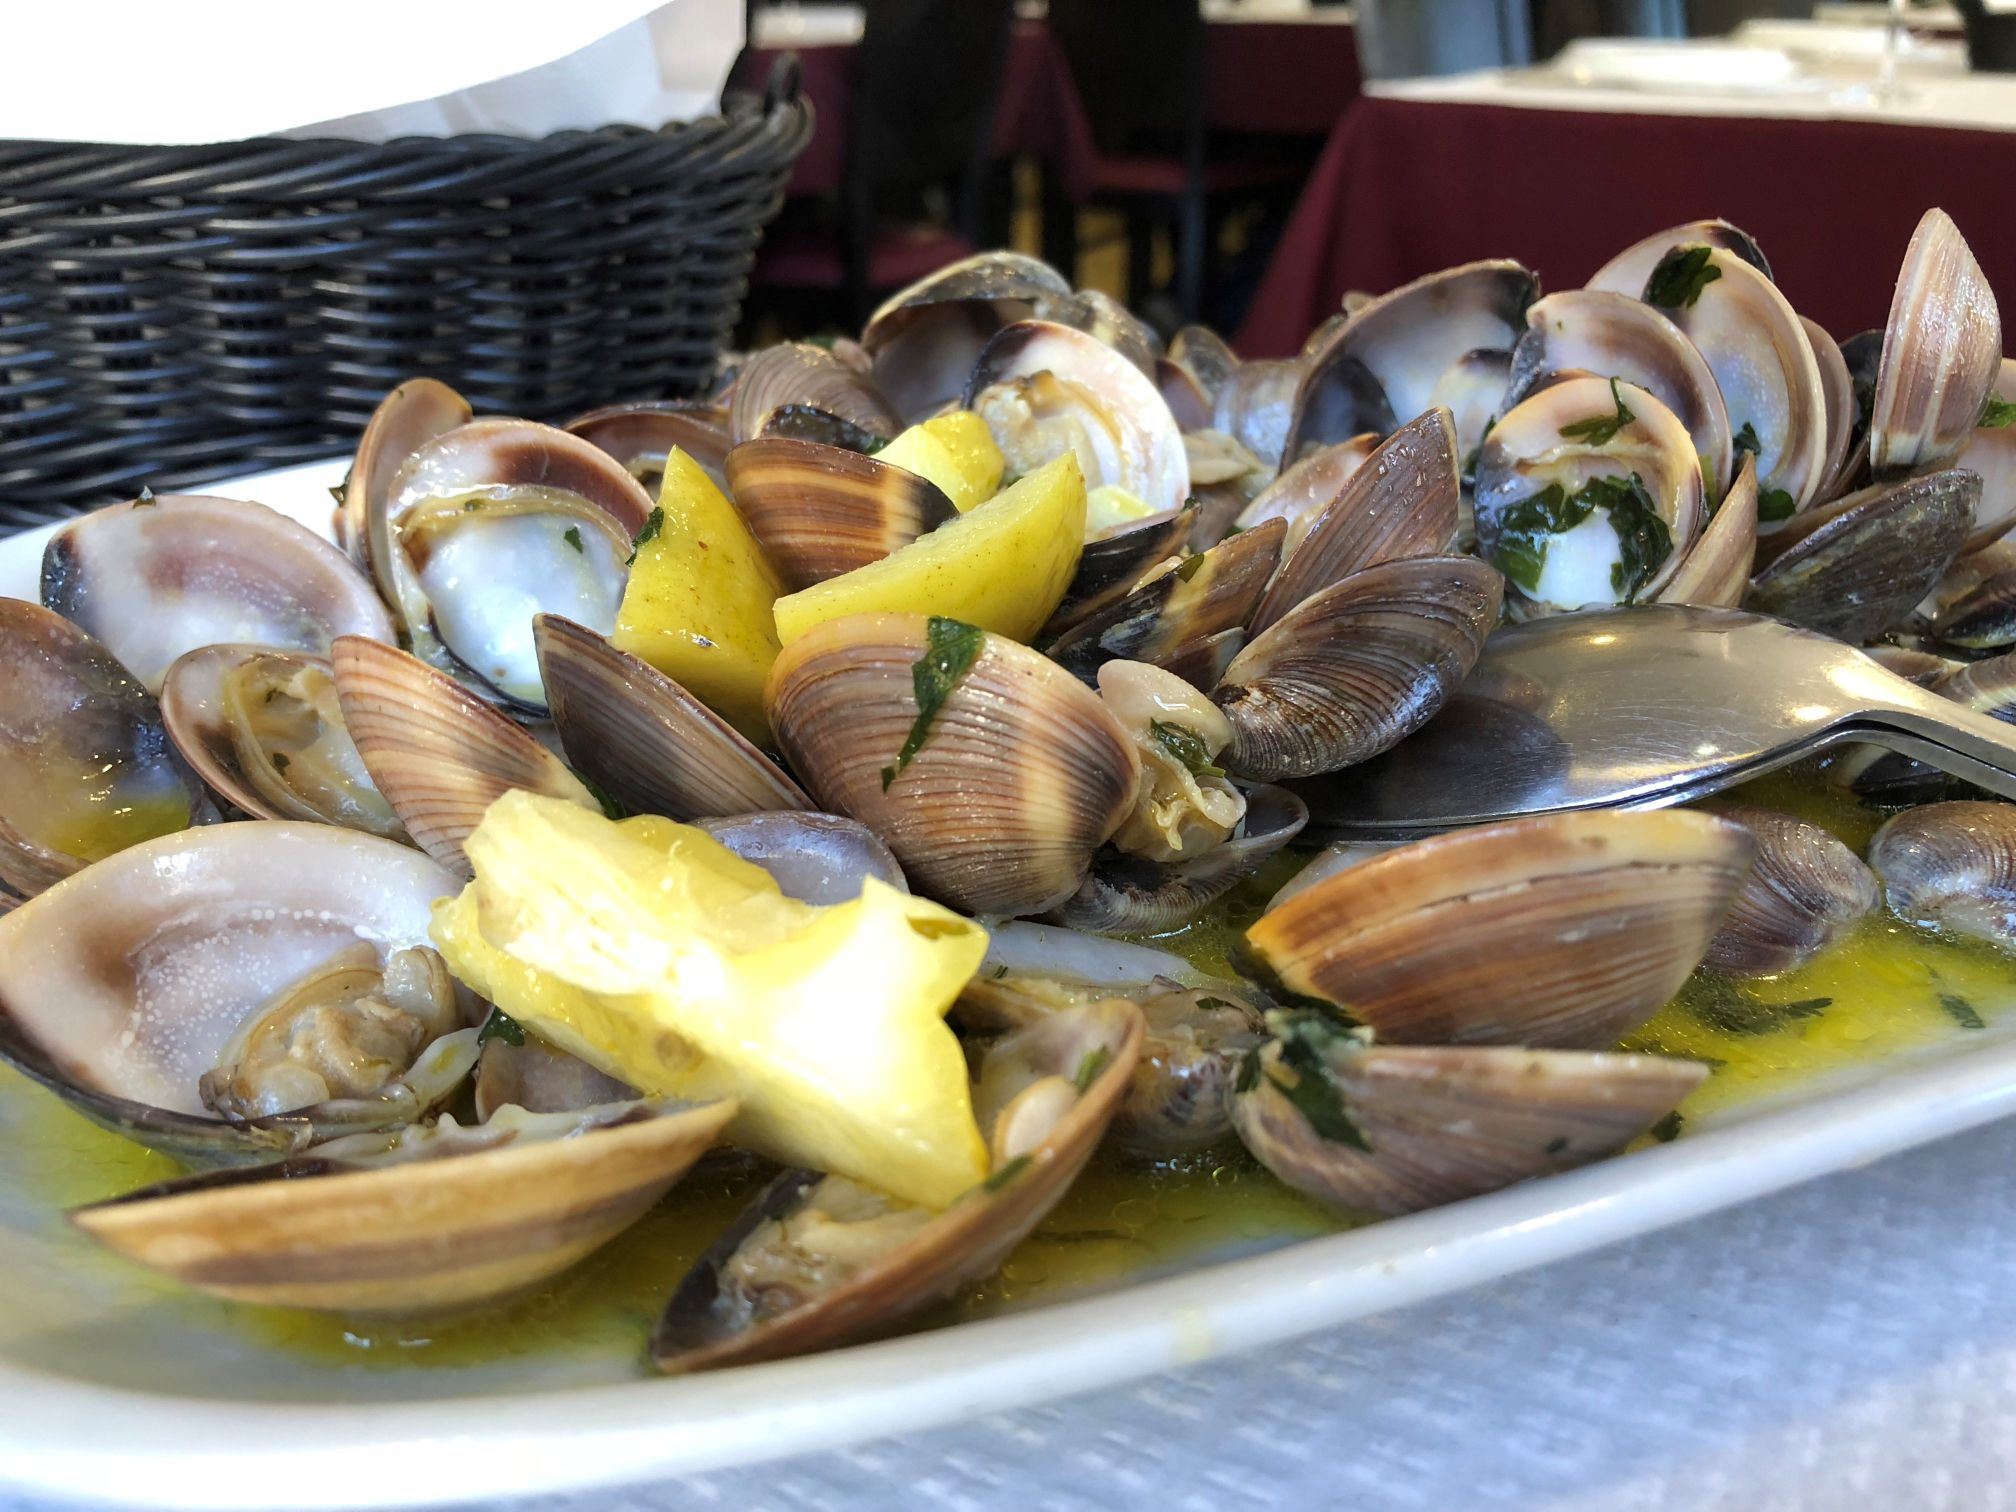 Clams with parsley and lemon in the "Restaurant Teresa" in Matosinhos